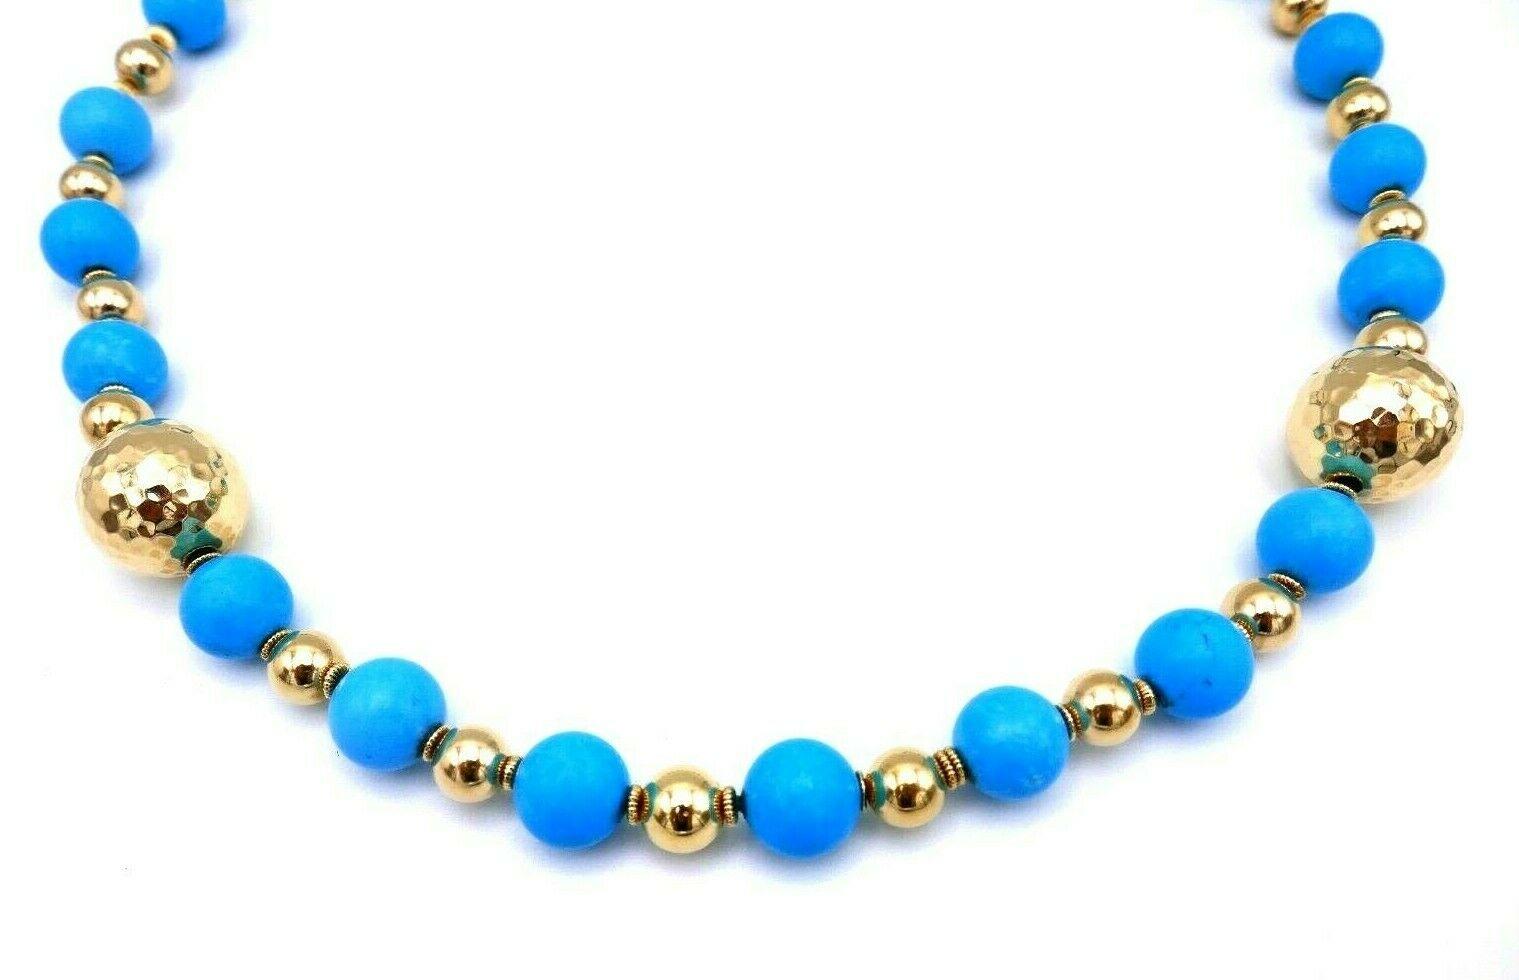 Gorgeous vintage bead necklace made of turquoise and 14k yellow gold. Featuring polished, textured and hammered gold beads. Stamped with a hallmark for 14k gold.
Measurements: length is 26